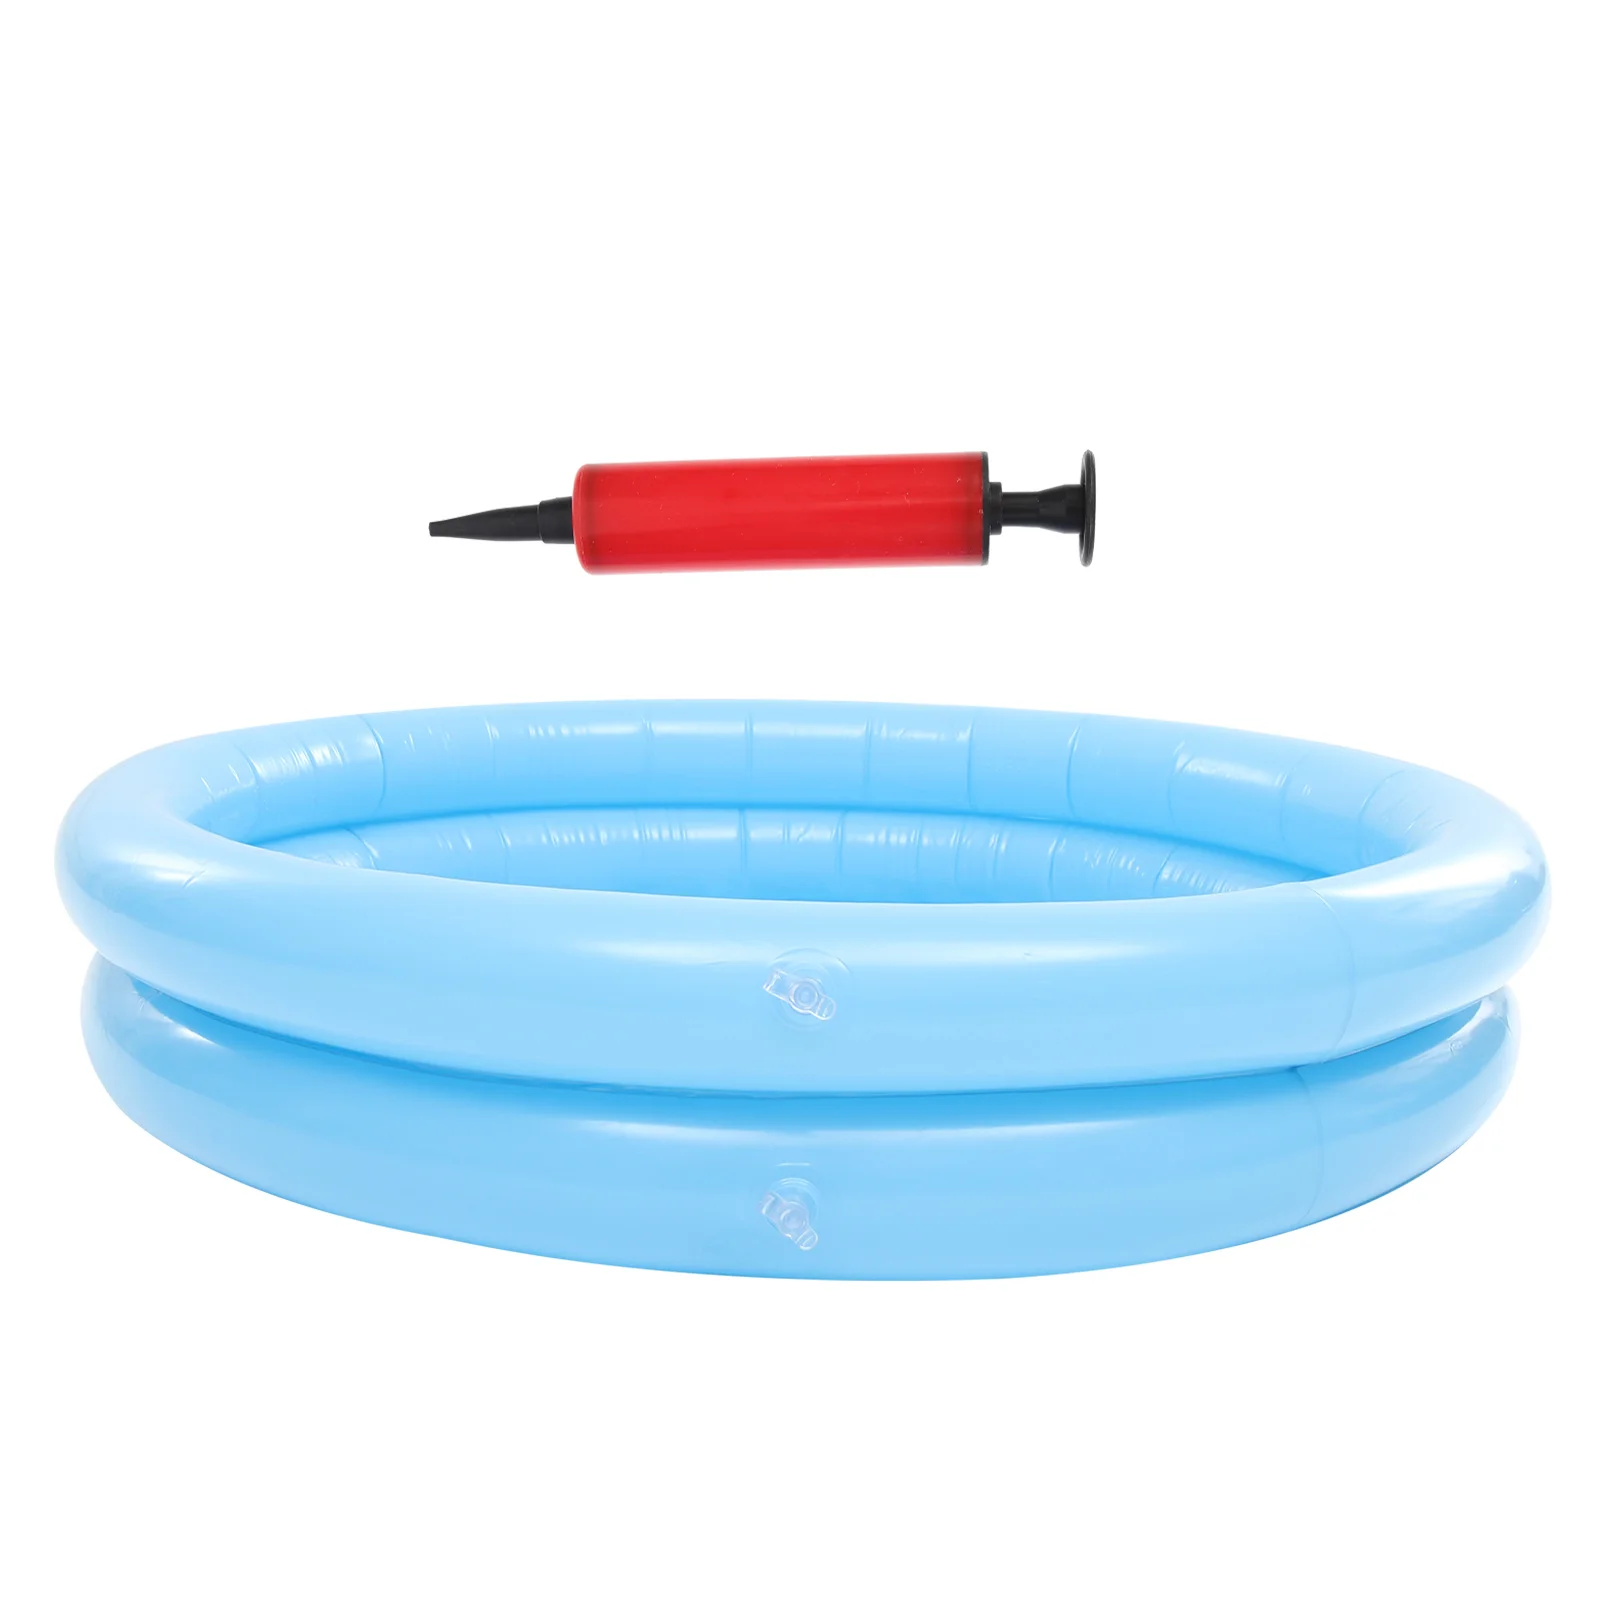 

Pool Inflatable Kids Toys Swimming Sand Up Blow Children Round Baby Bath Fishing Summer Kid Table Outdoor Kiddie Paddling